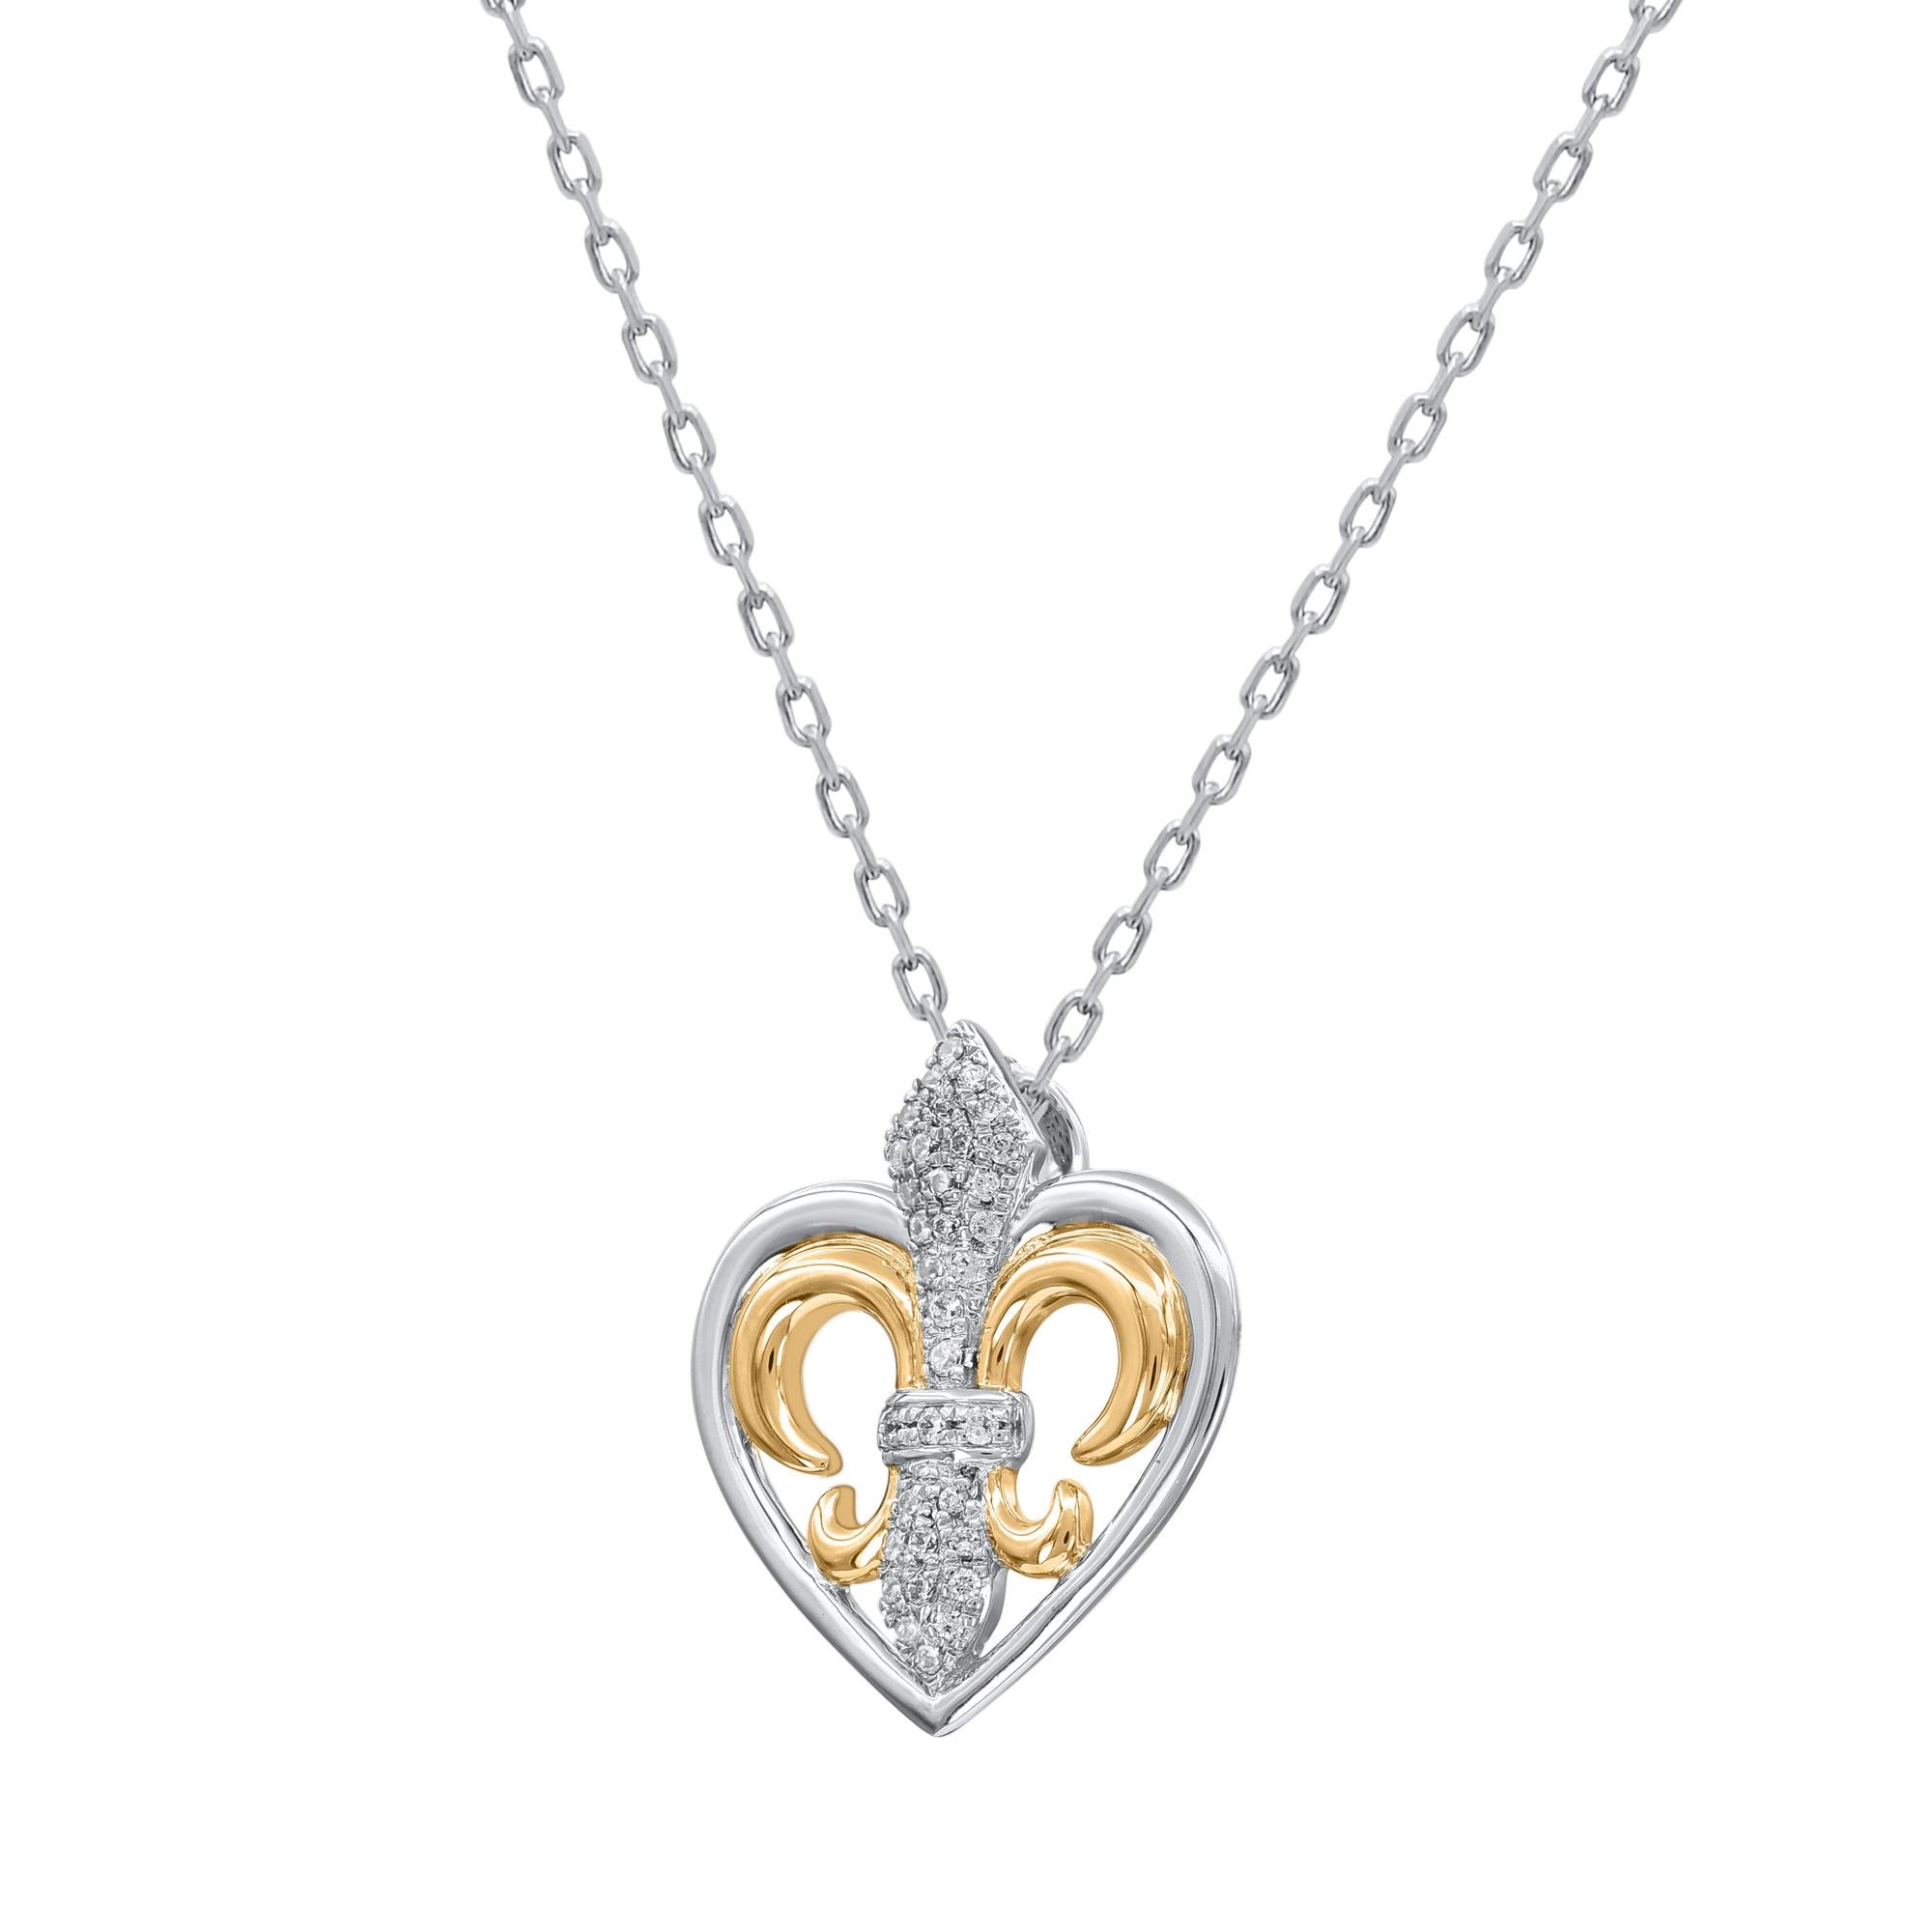 A dazzling look for a day or evening, this heart pendant makes a brilliant addition to her wardrobe. These pendants are studded with 34 single cut natural diamonds in pave and prongs setting. and pendant crafted in 14 karat two tone gold. Diamonds